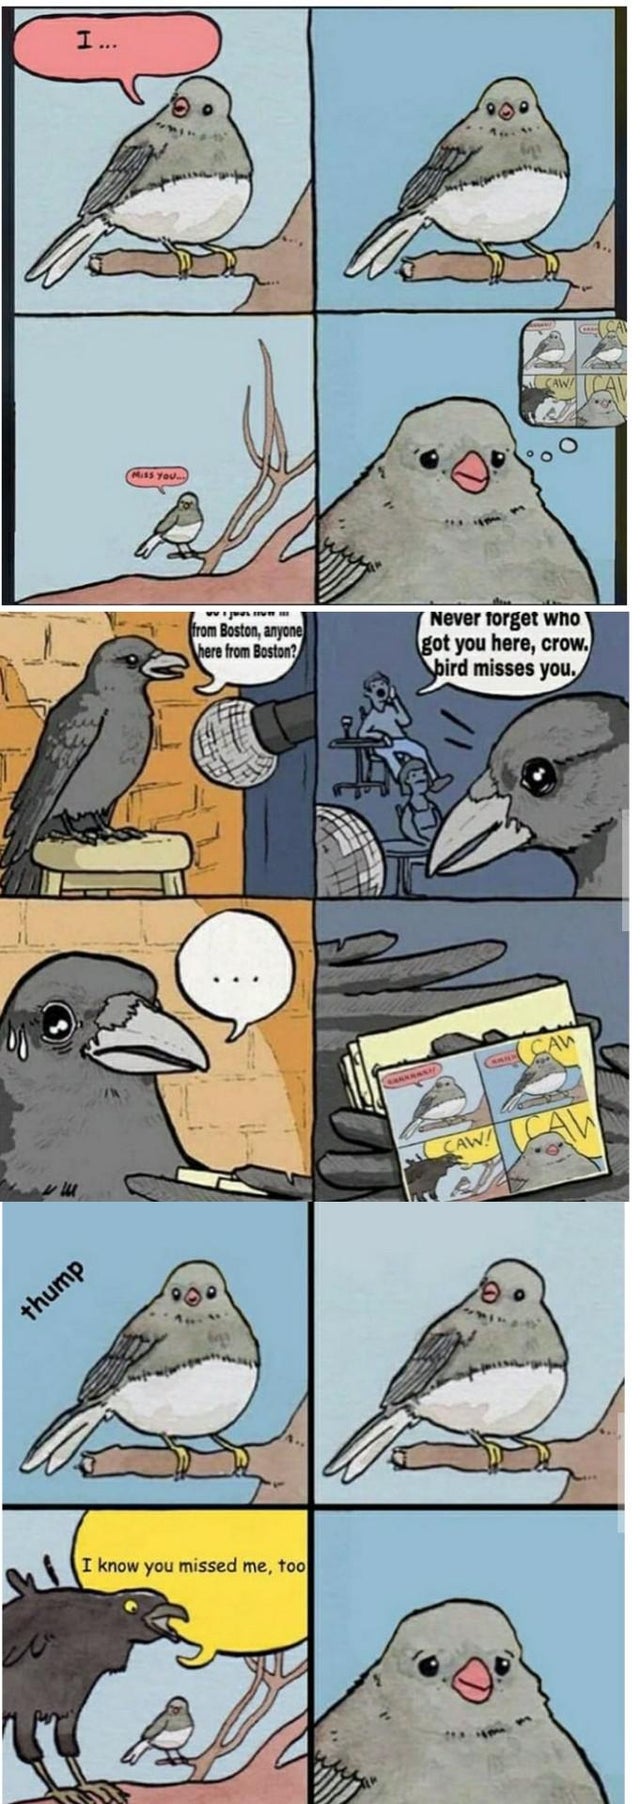 wholesome meme - comics - Miss You wem from Boston, anyone here from Boston? Never forget who got you here, crow. bird misses you. Caw! thump I know you missed me, too